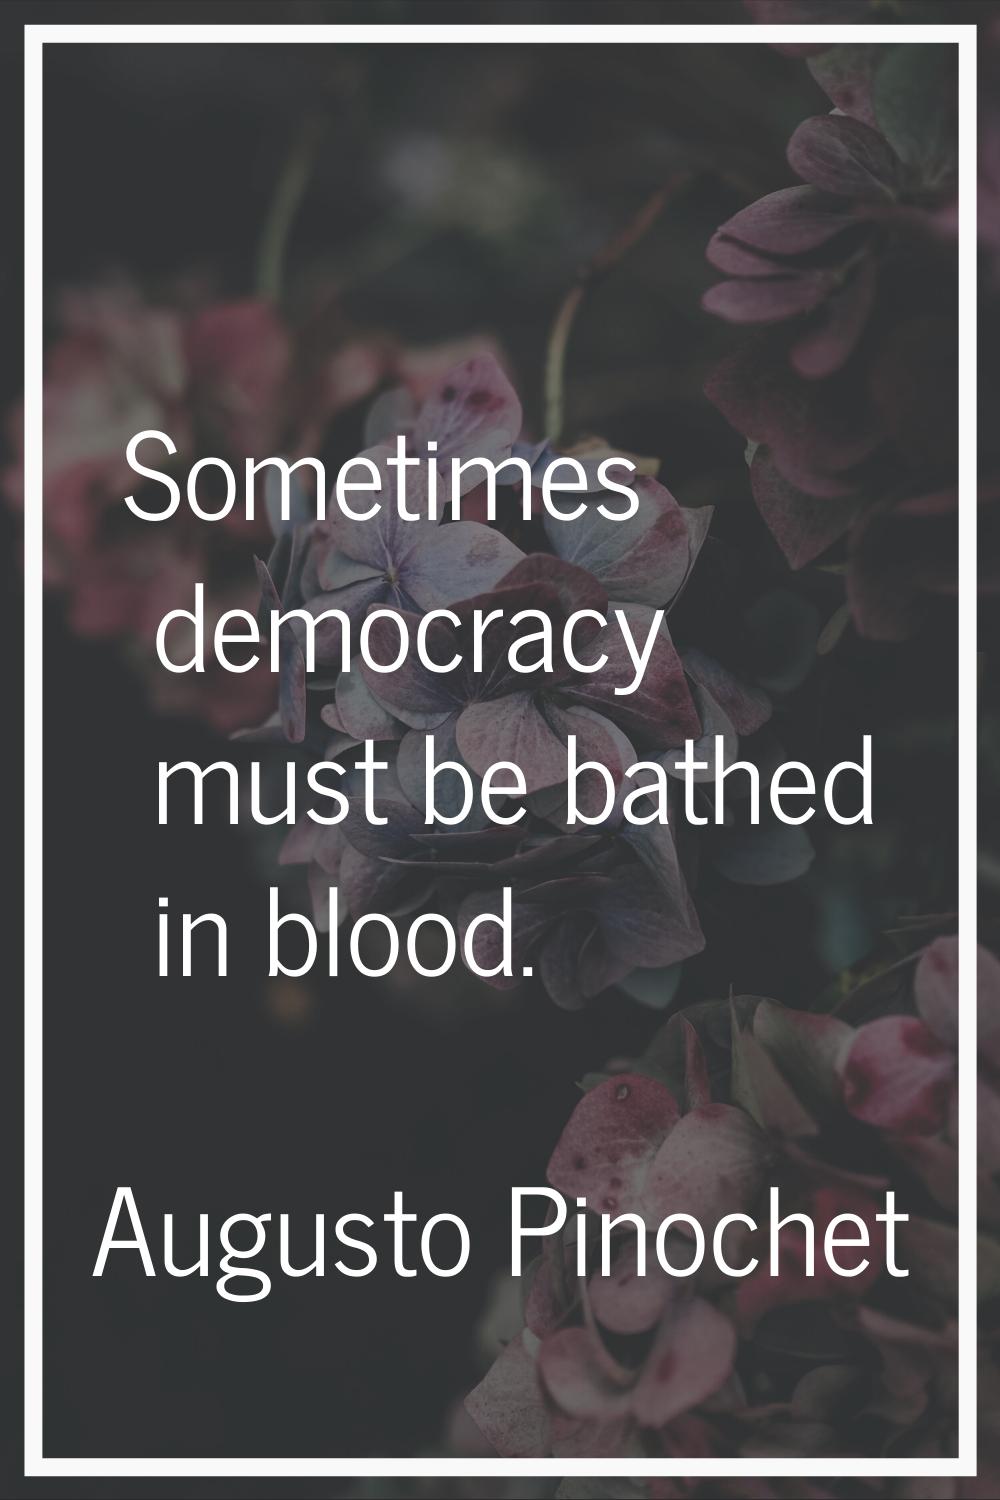 Sometimes democracy must be bathed in blood.